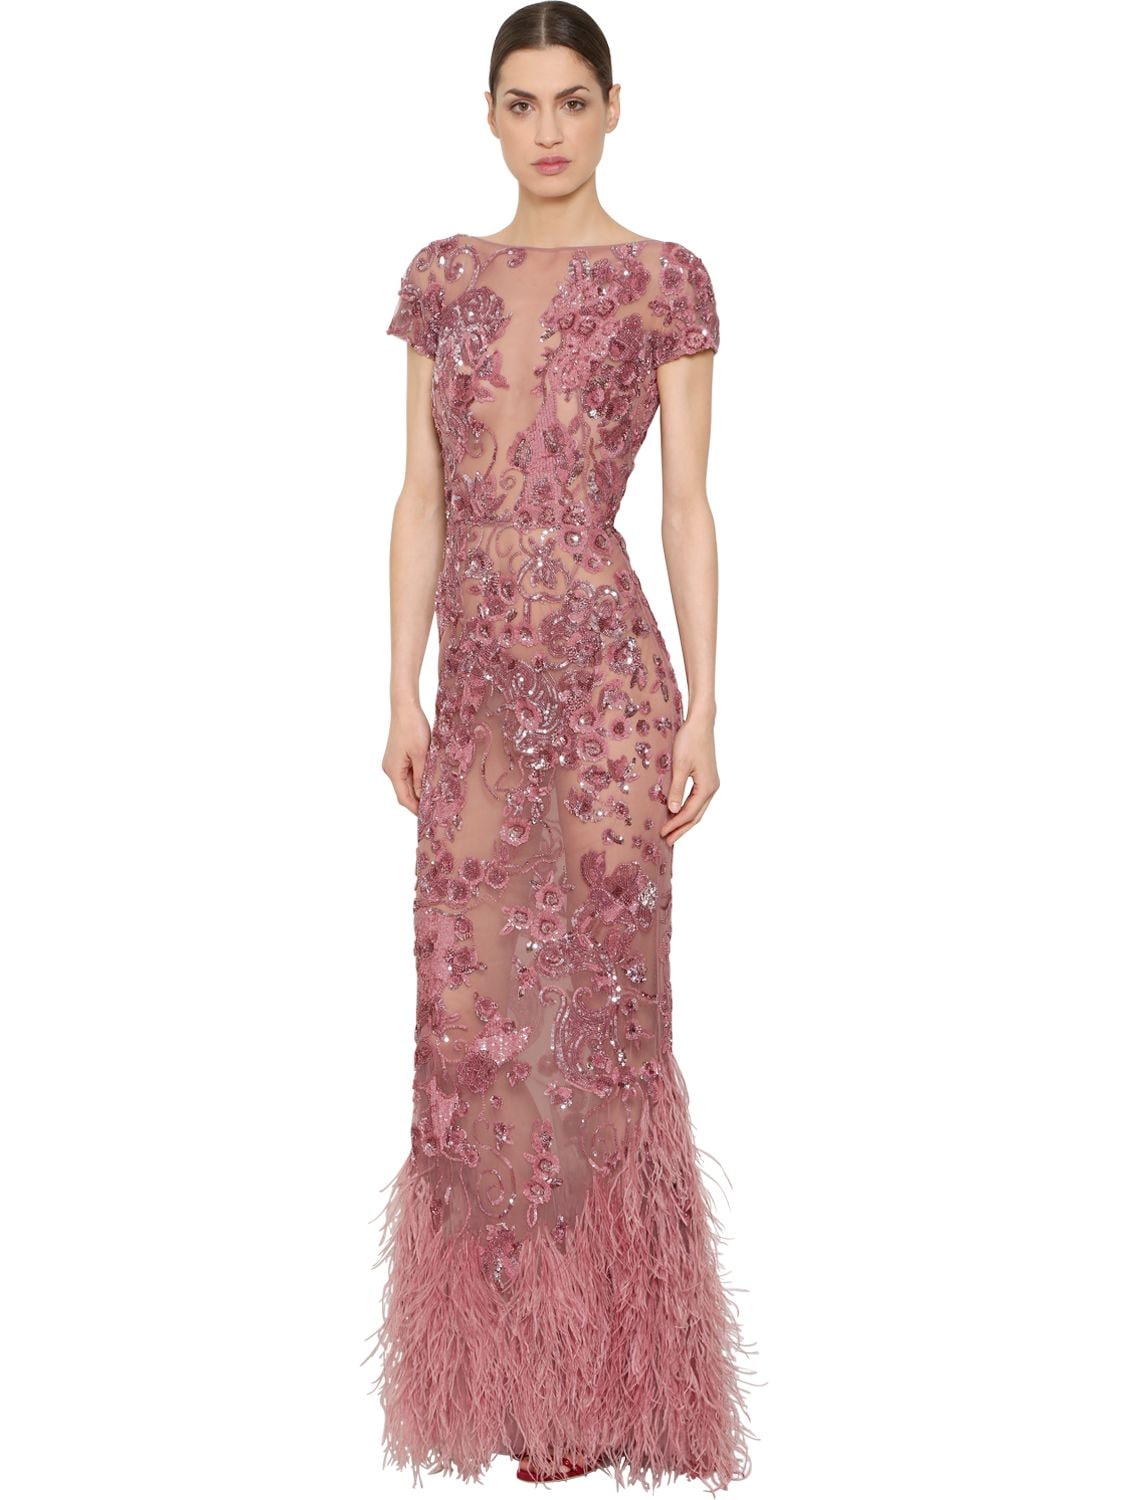 Zuhair Murad Embellished Lace Gown In Pink